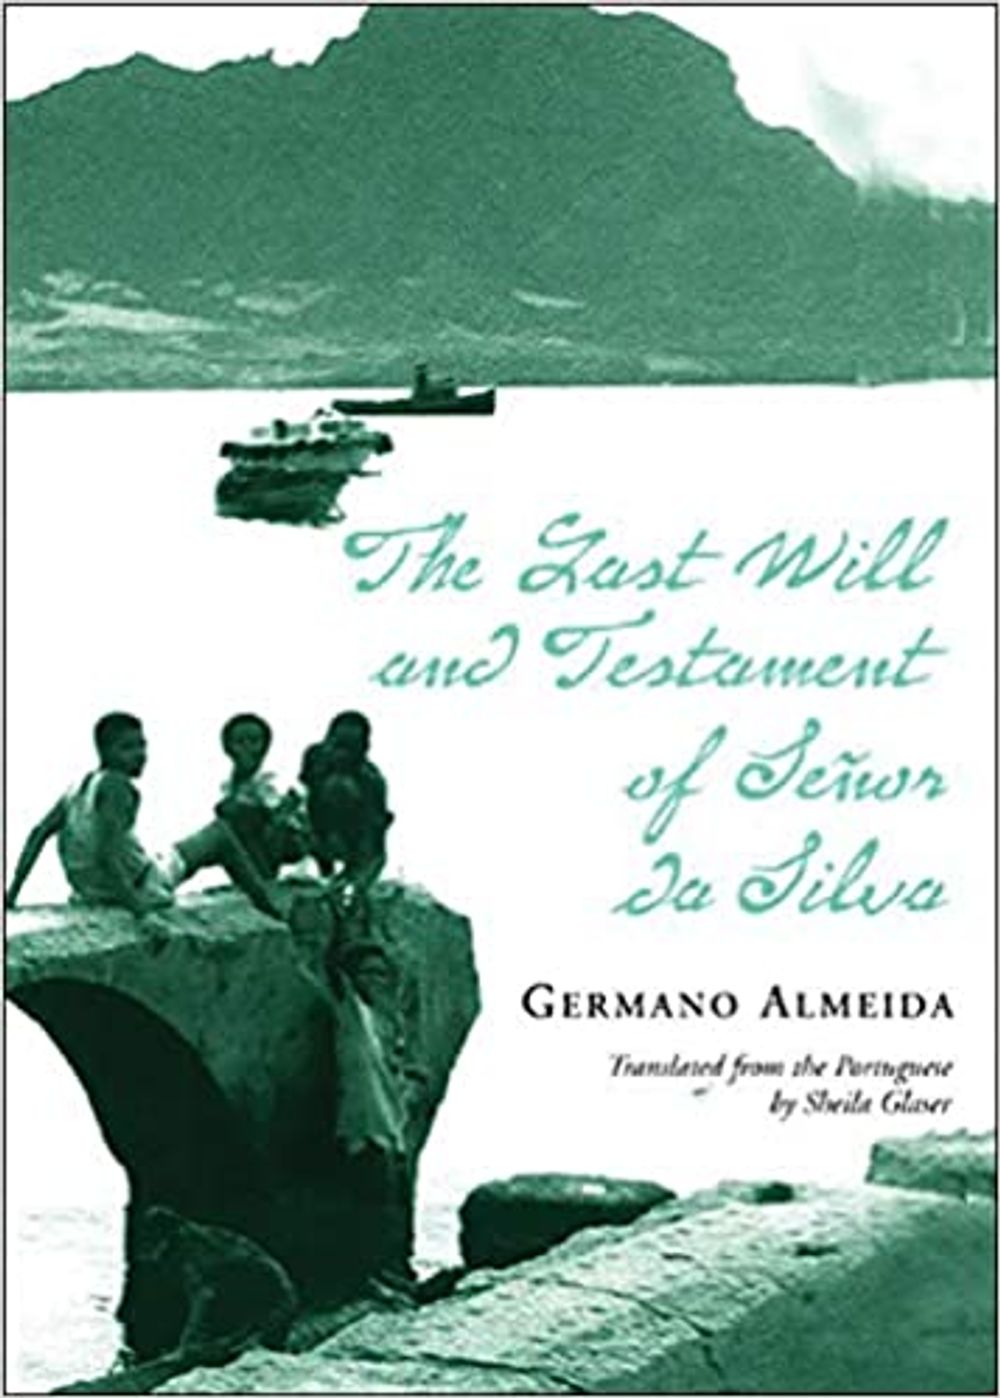 Cover of The Last Will and Testament of Germano Almeida.